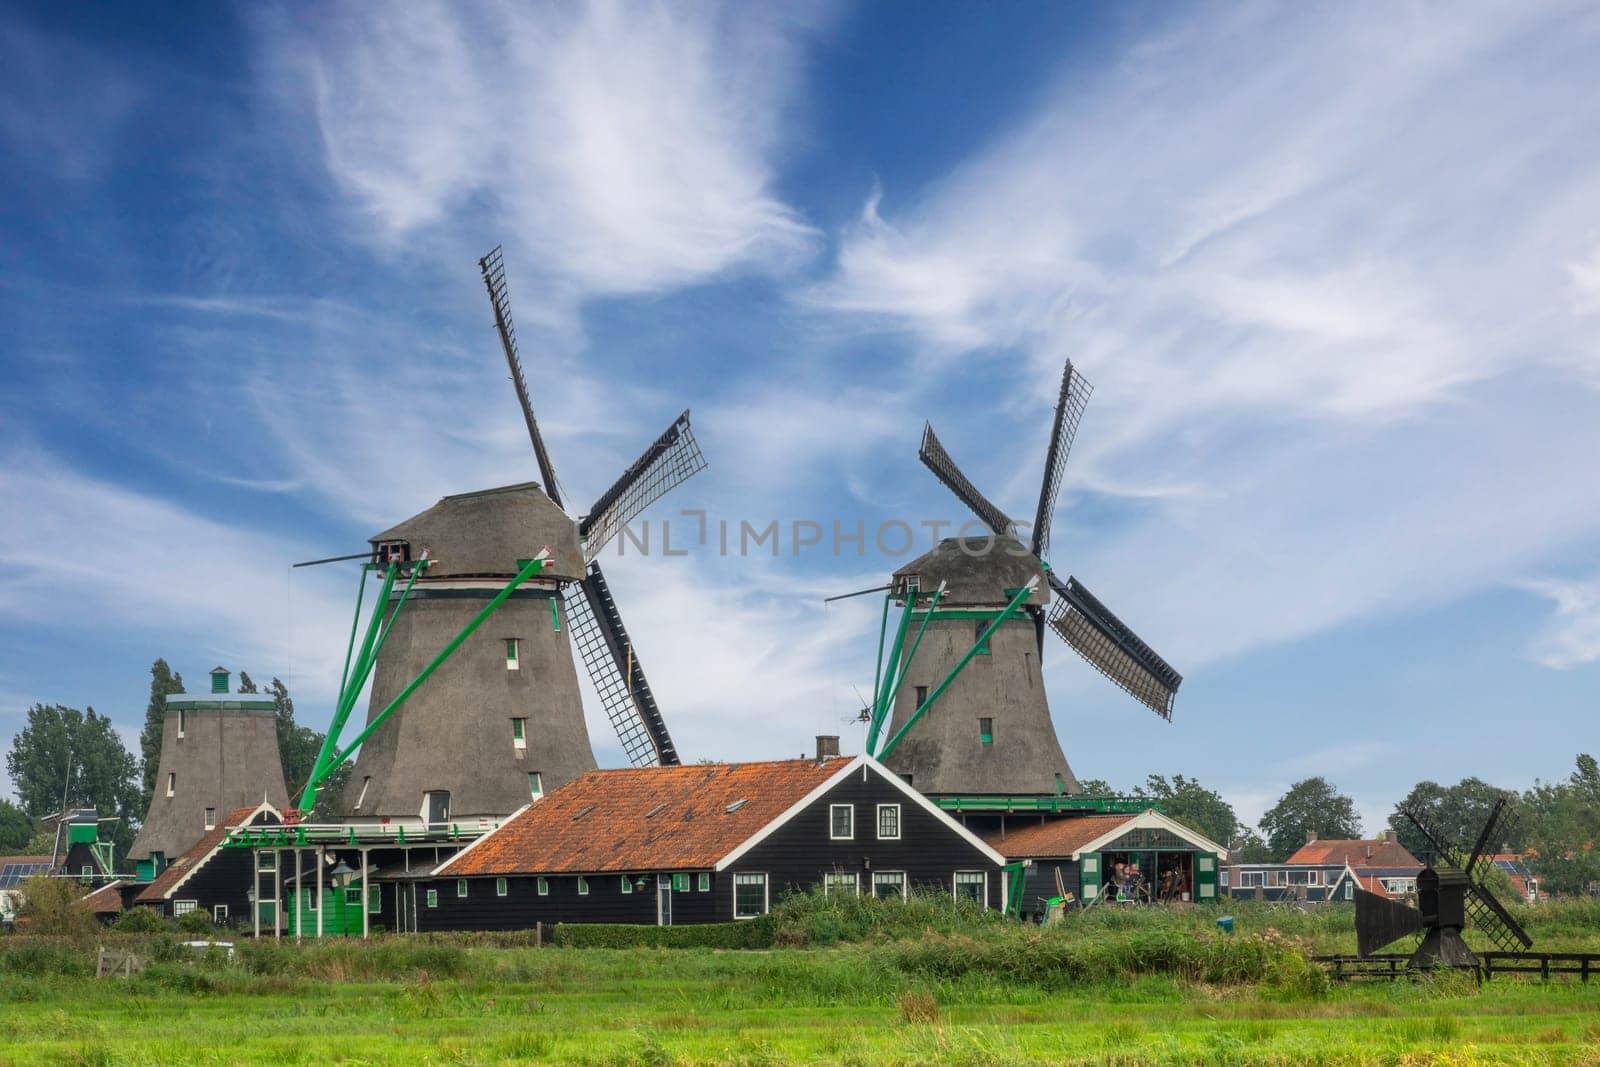 Netherlands. Summer day in Zaanse Schans. Two old windmills and high clouds in the blue sky